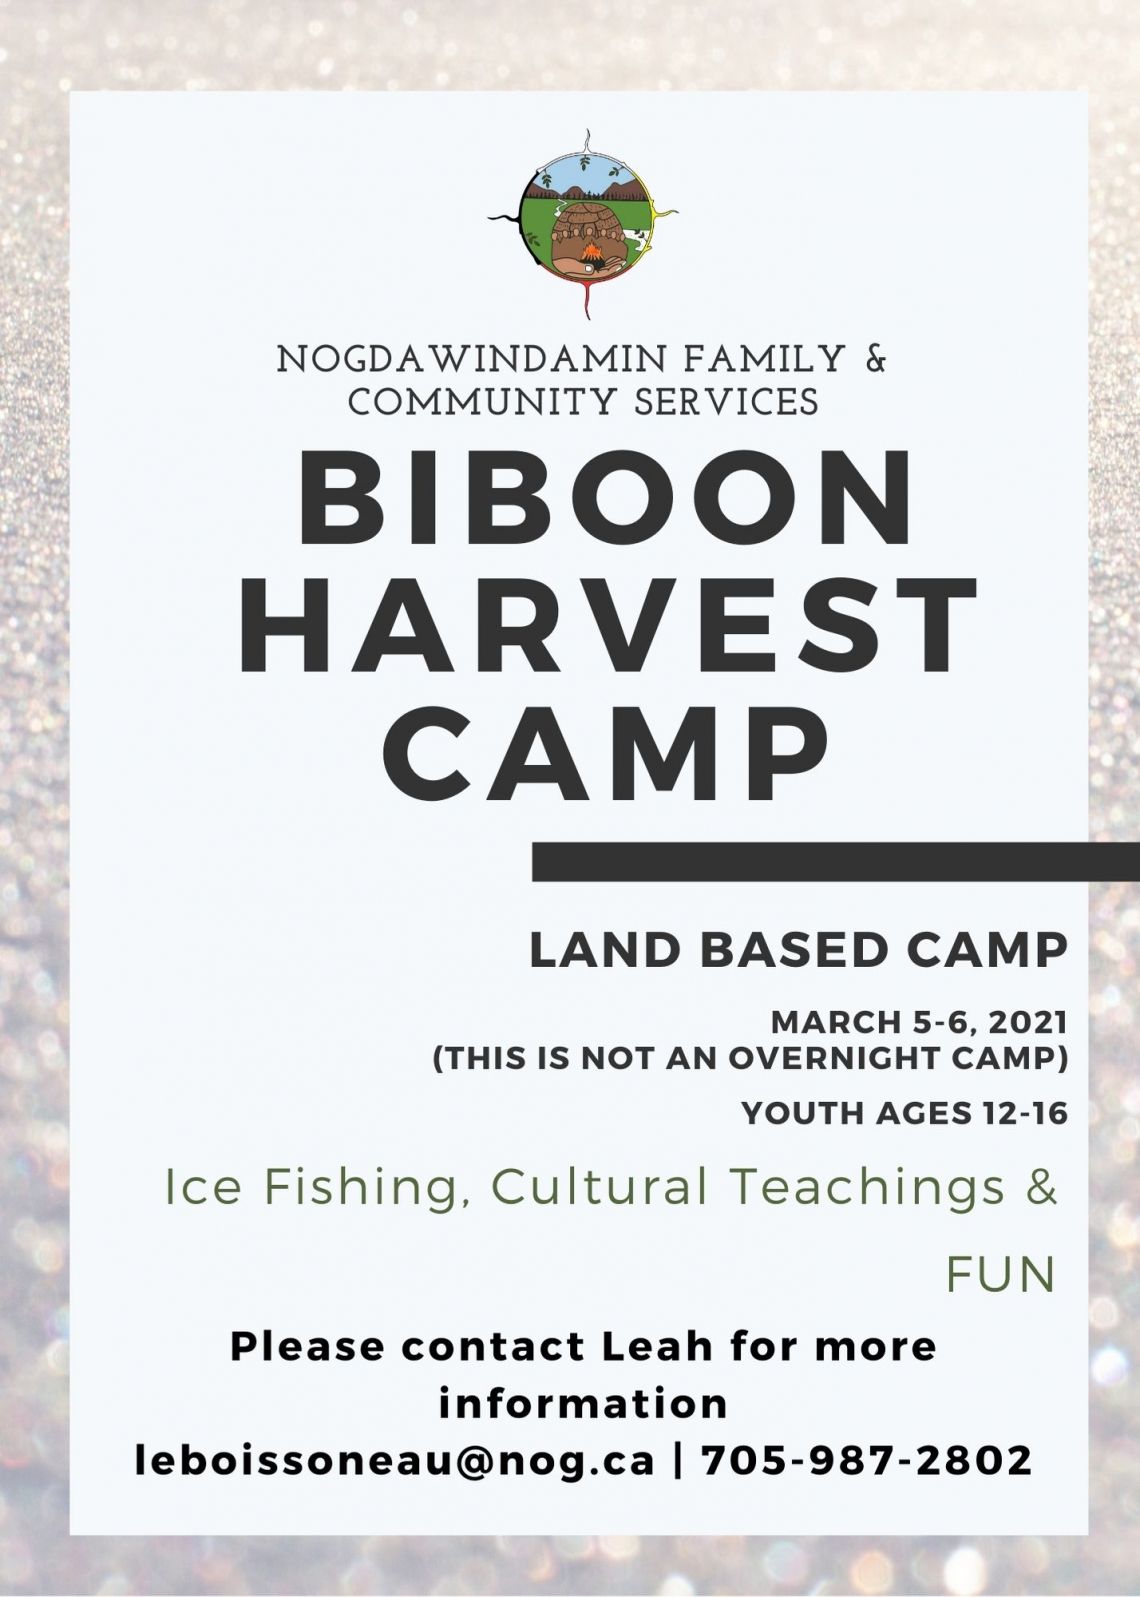 Nogdawindamin Family & Community Services Biboon Harvest Camp Land Based Camp March 5 to 6, 2021.  Not an overnight camp.  Youth ages 12 to 16.  Ice Fishing.  Cultural Teachings and Fun.  Please contact Leah for more information email leboissoneau@nog.ca  or phone 705-987-2802